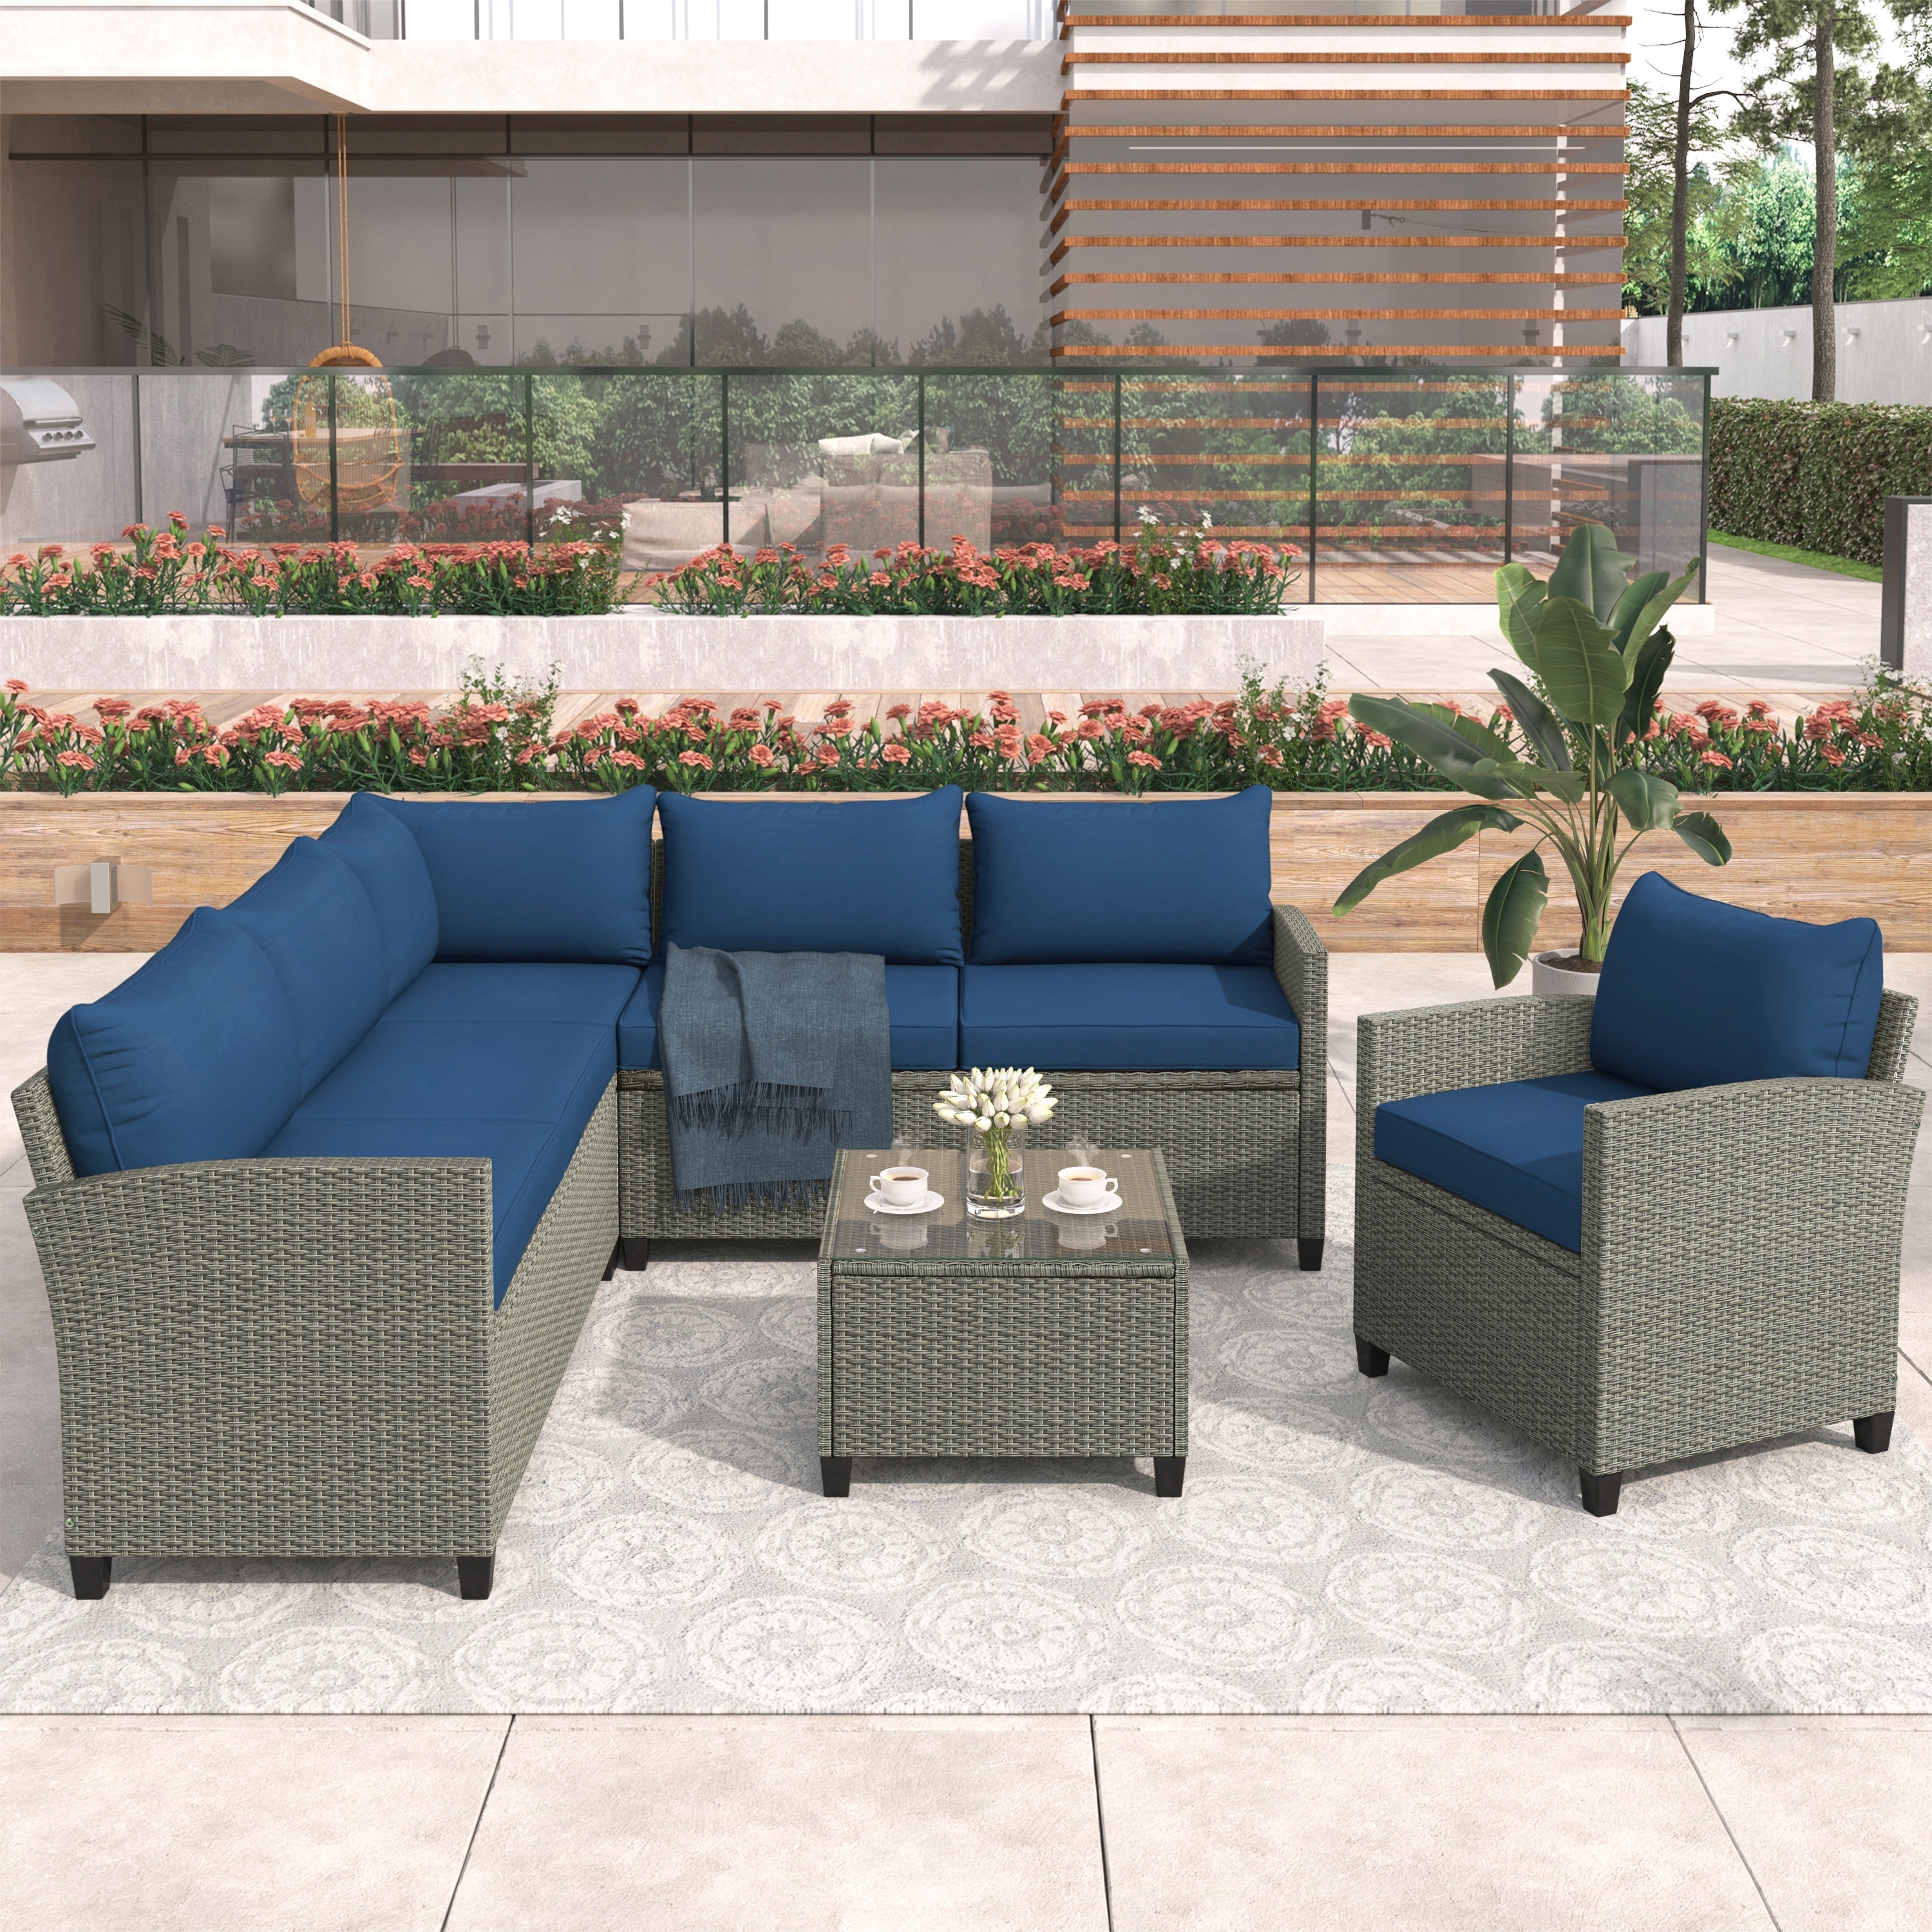 5 Piece Outdoor Conversation Set  Patio Furniture Sectional Sofa Set With Single Chair